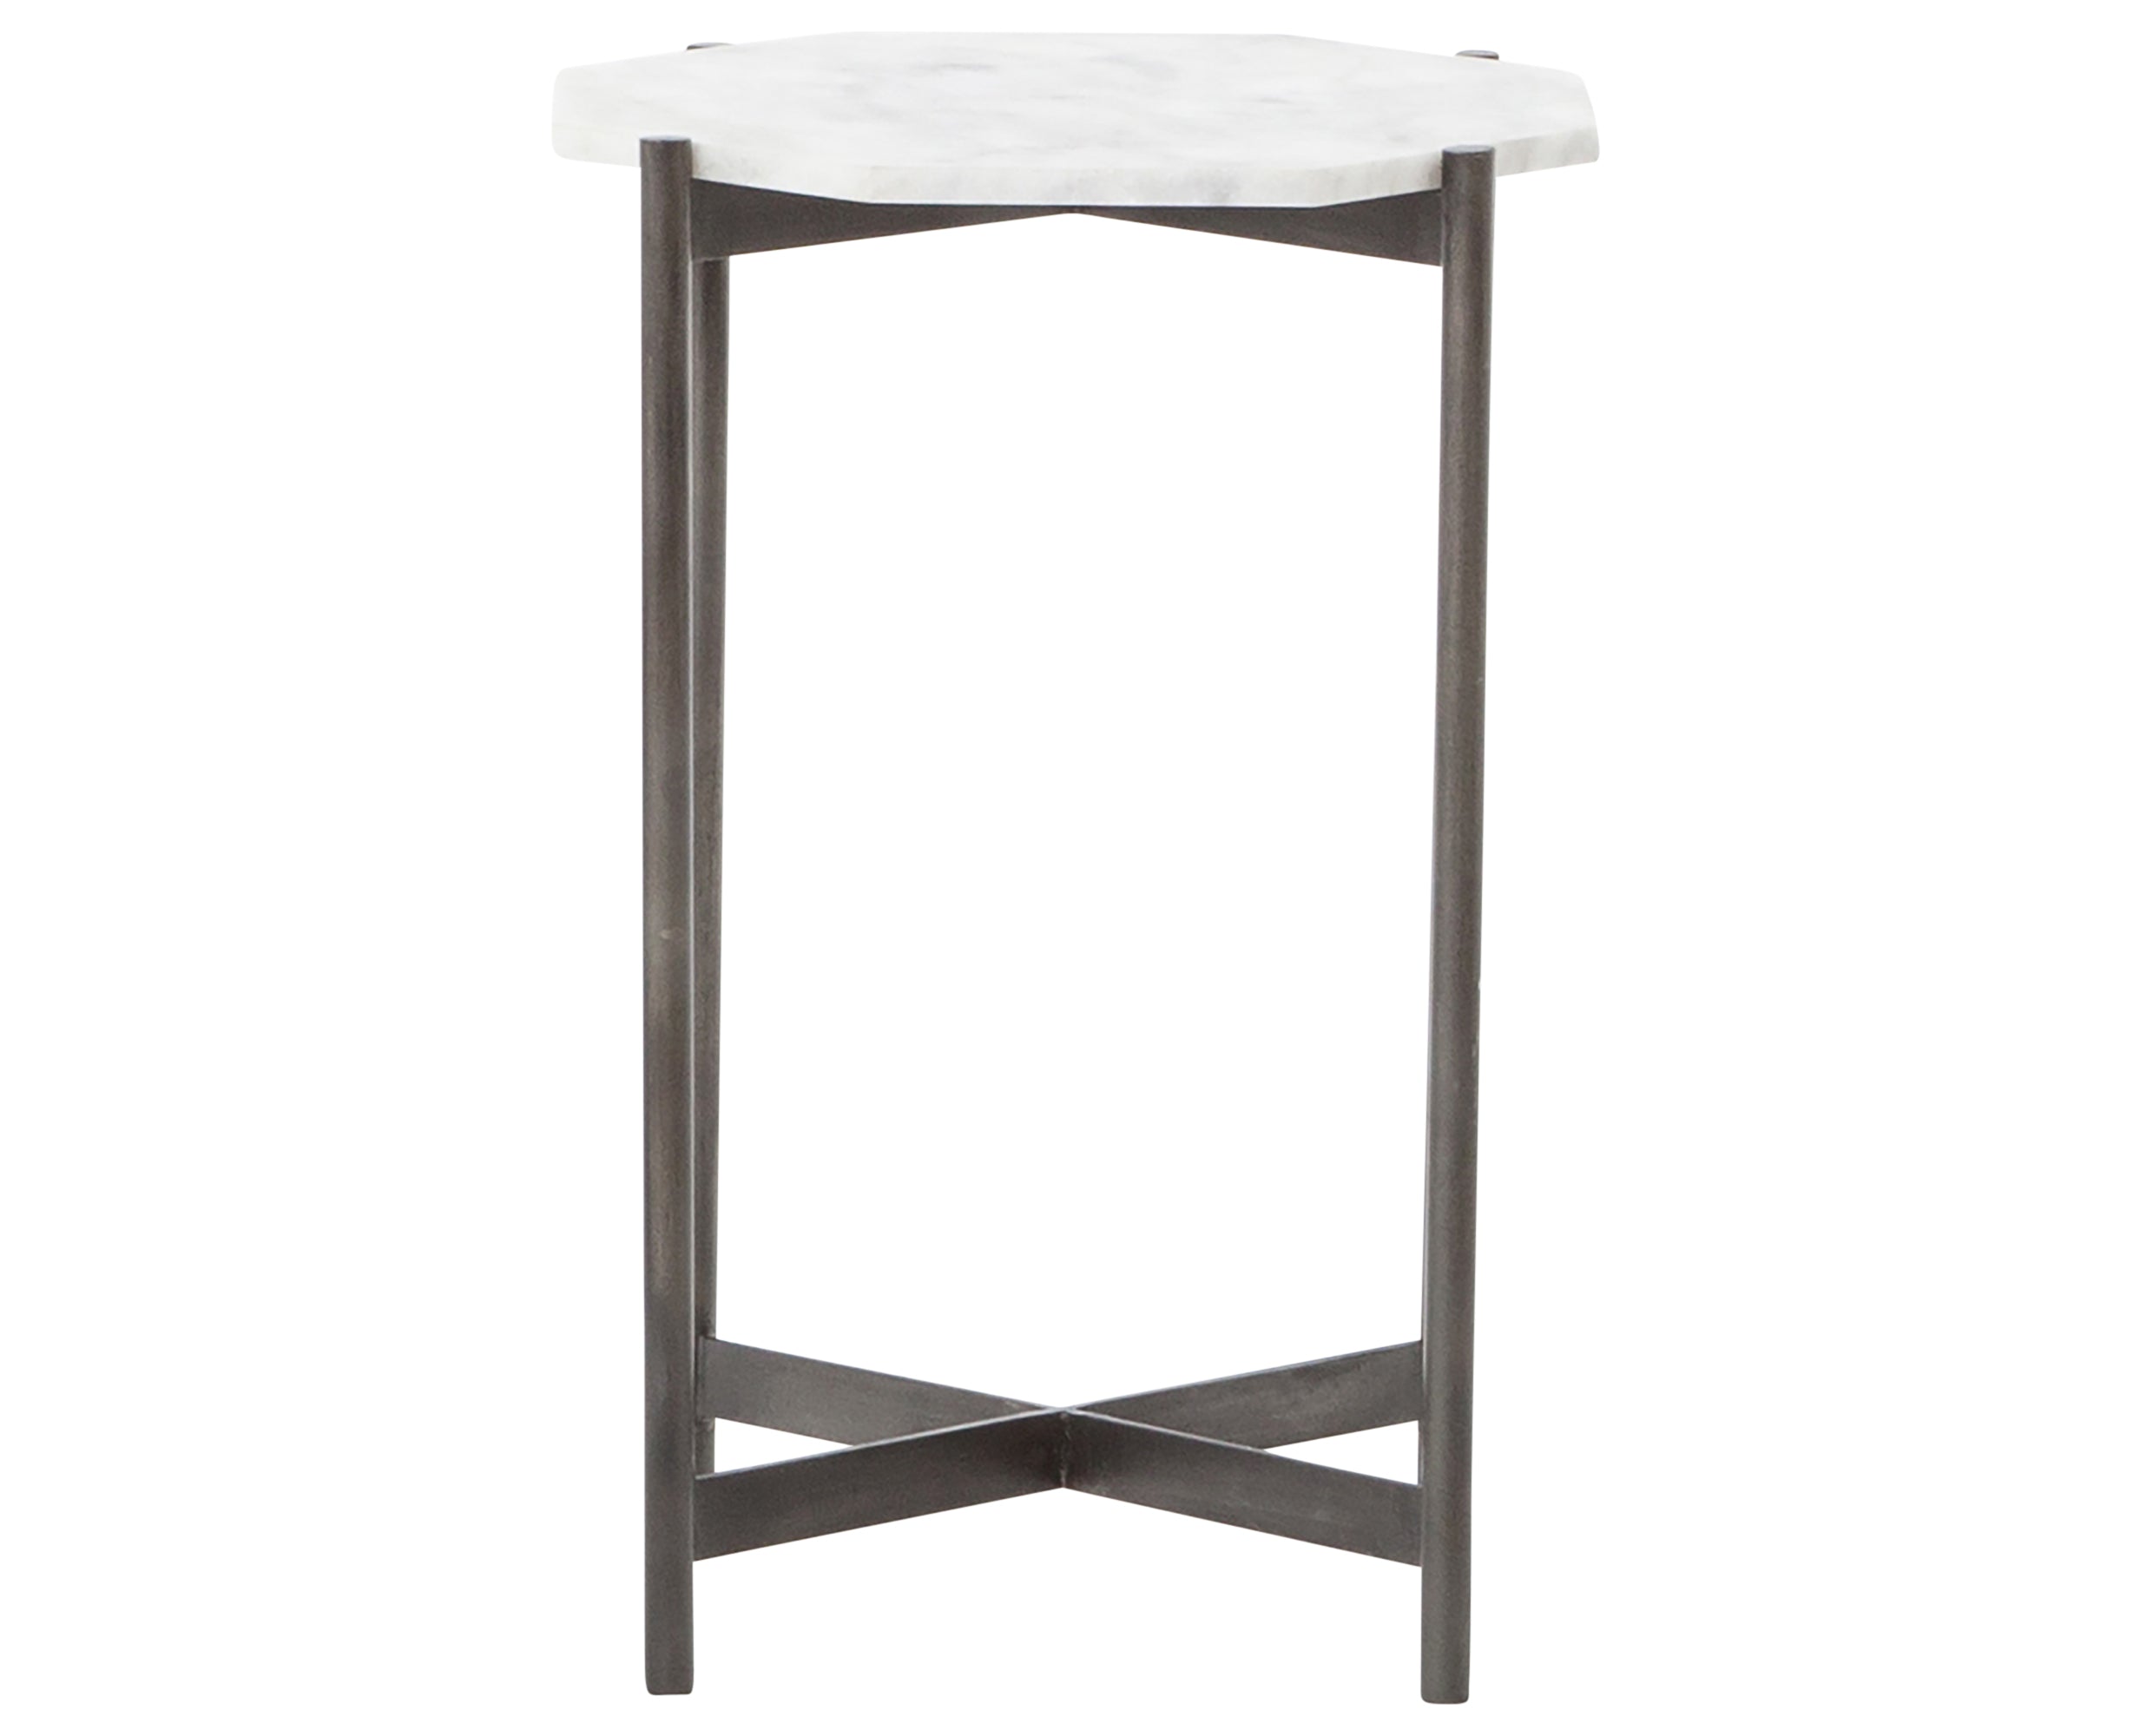 Hammered Grey Iron with Polished White Marble | Adair Side Table | Valley Ridge Furniture